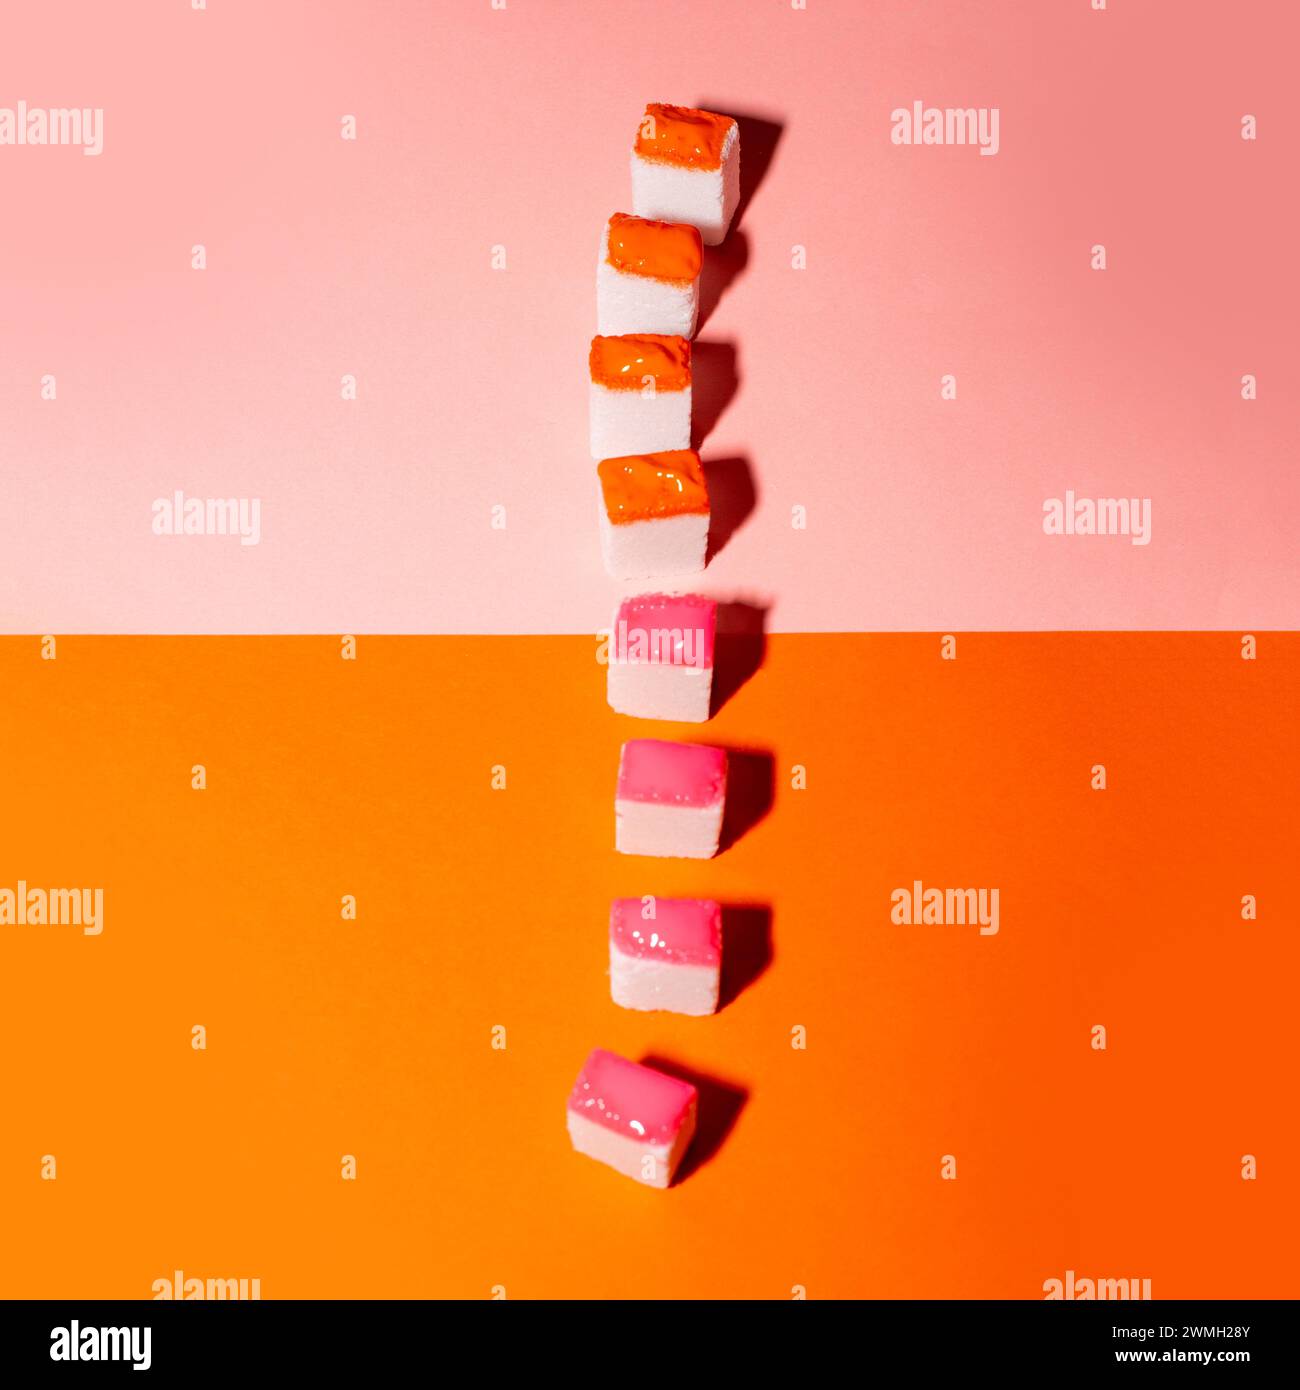 Colorful sugar cubes on orange and pink background. Minimal creative concept. Stock Photo